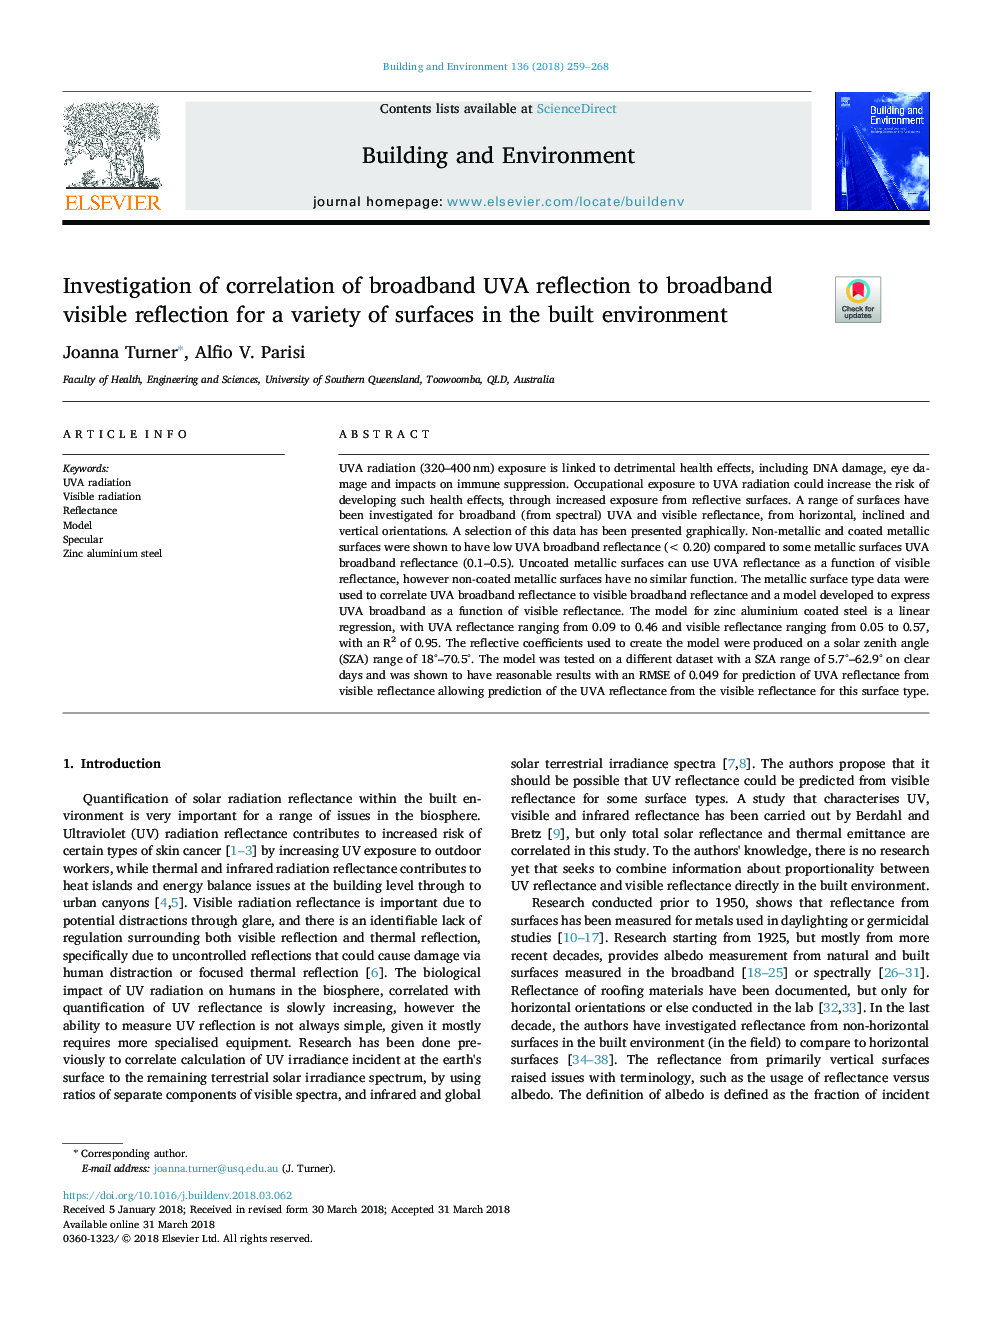 Investigation of correlation of broadband UVA reflection to broadband visible reflection for a variety of surfaces in the built environment